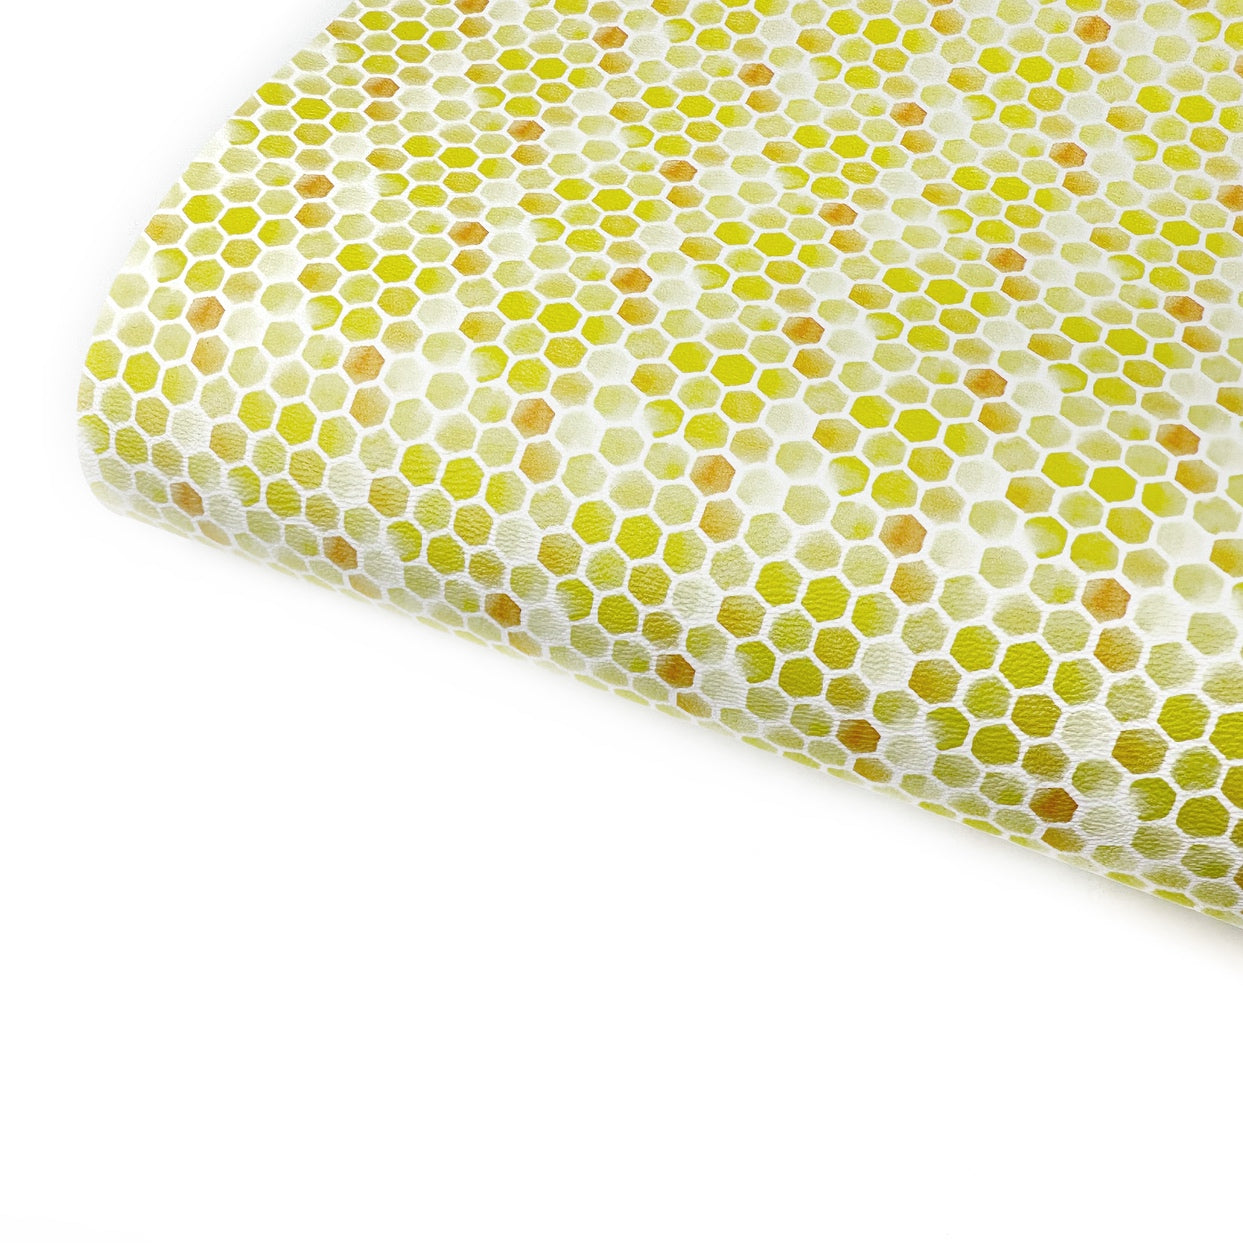 Brightest Bee Hives Premium Faux Leather Fabric Sheets